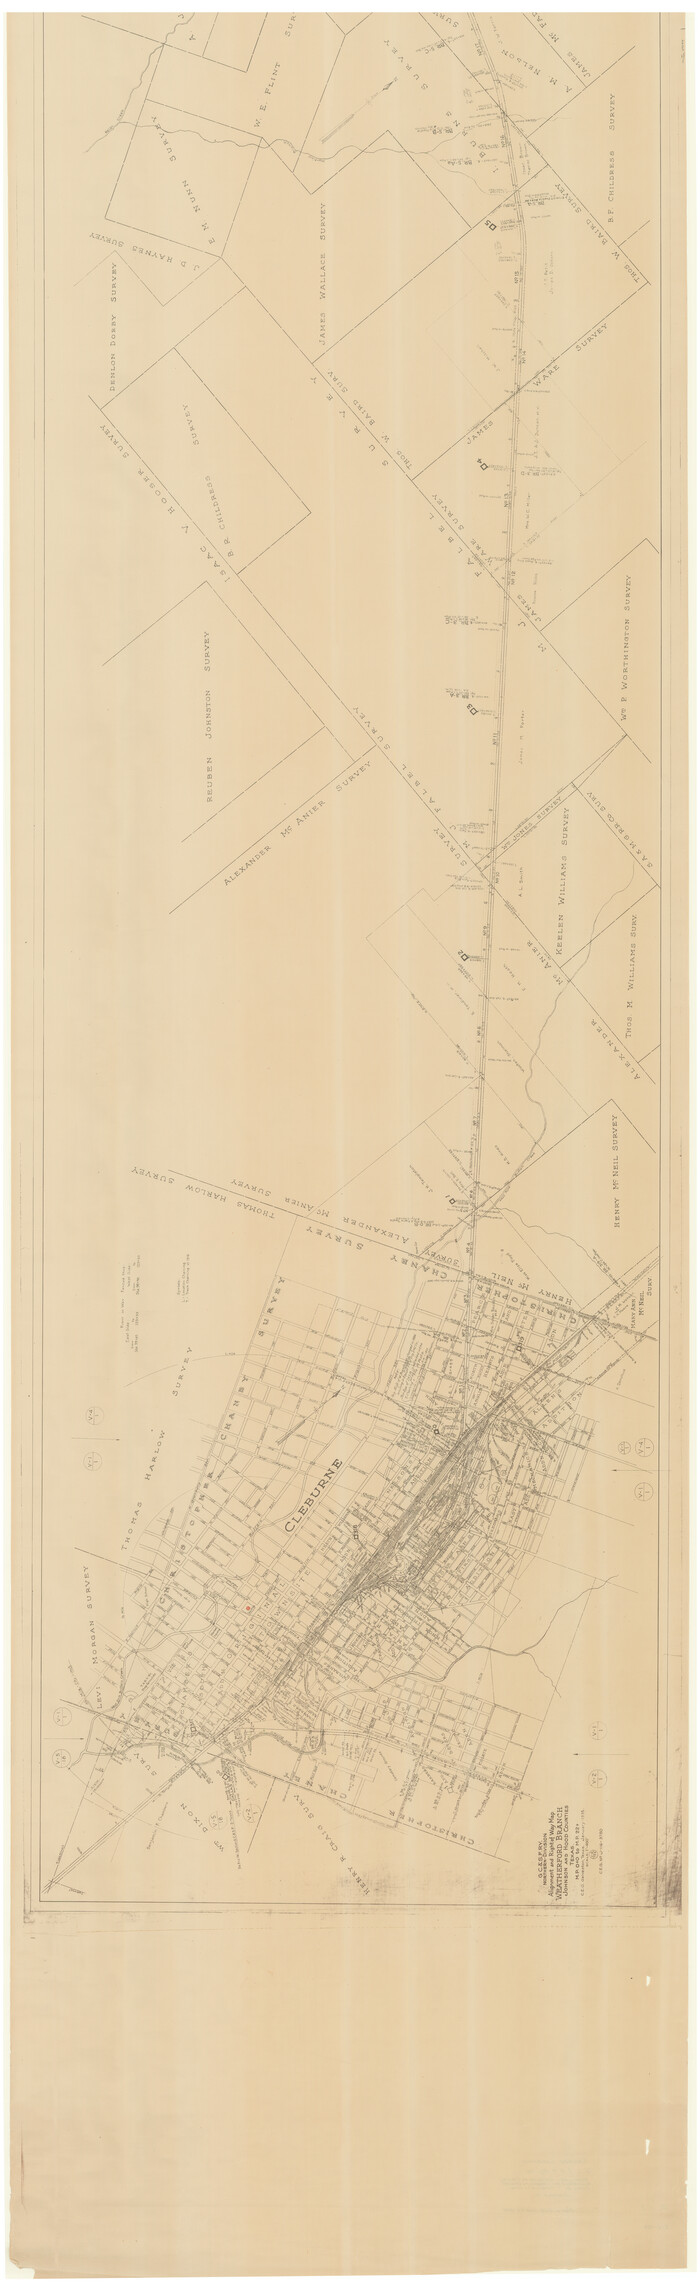 64647, G. C. & S. F. Ry. Northern-Division, Alignment and Right of Way Map, Weatherford Branch, Johnson and Hood Counties, Texas, General Map Collection